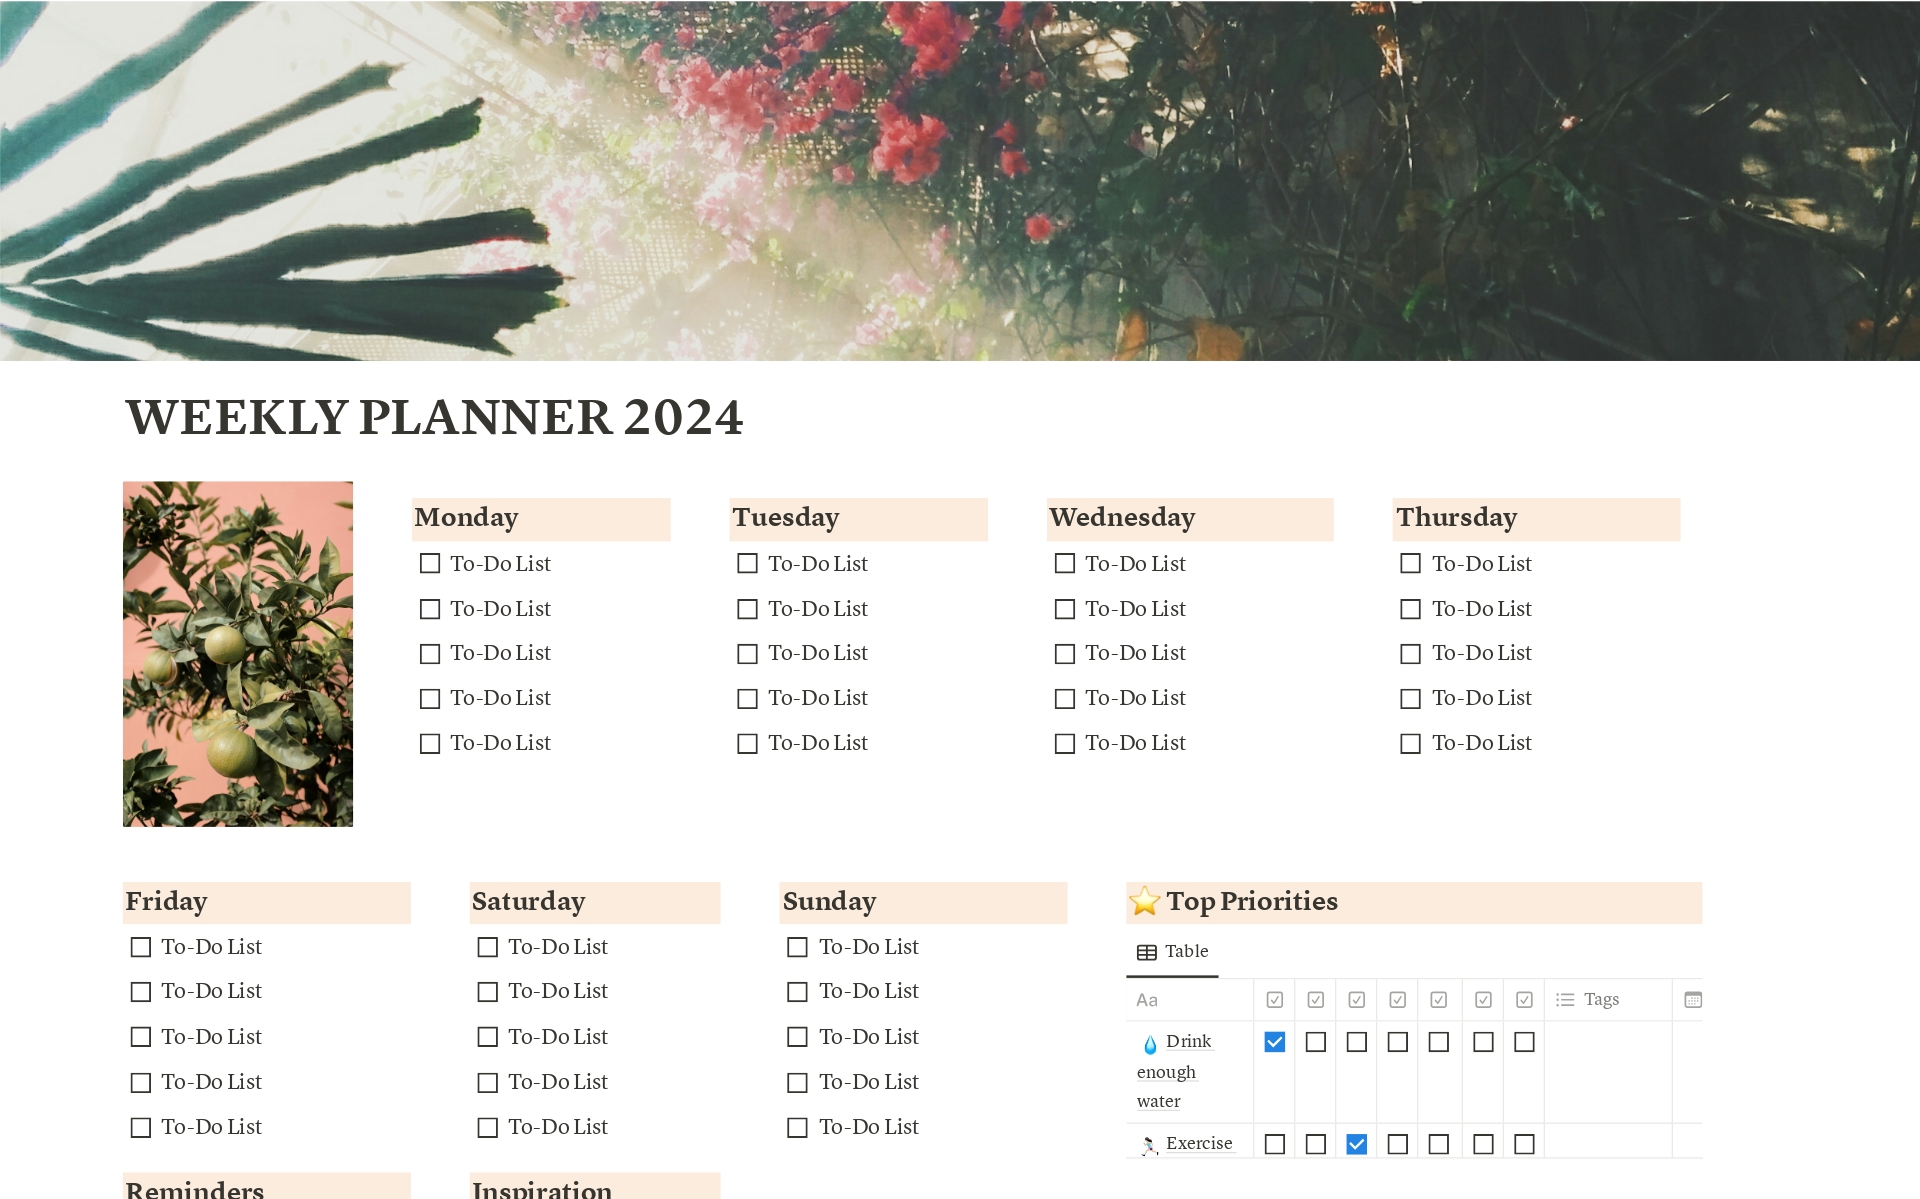 Notion Aesthetic Weekly Dashboard Planner Template - Simple To Do List, Daily Habit Tracker, Weekly Notes, Motivational quotes

Prioritise yourself every day with this digital Notion planner template and checklist!